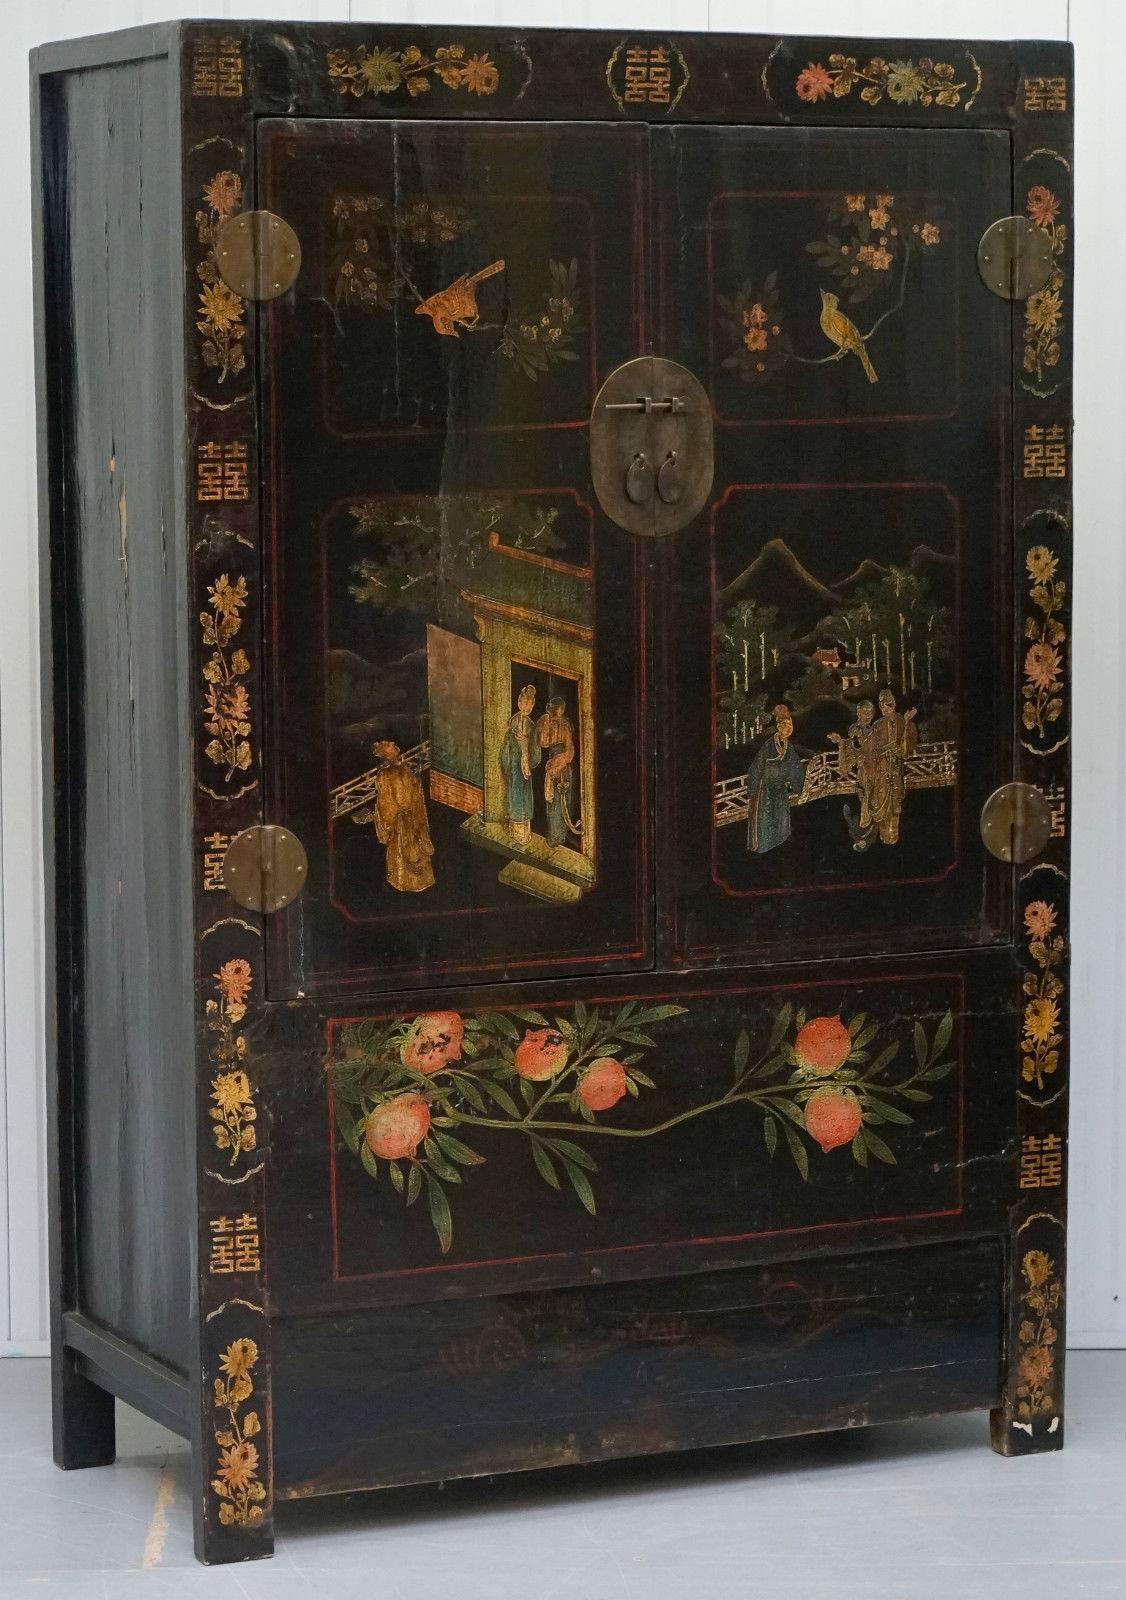 Wimbledon-Furniture

We are delighted to offer for sale this lovely pair of very rare late 19th century circa 1880 Chinese Chinoiserie marriage cabinets

This pair is very special and extremely desirable, they would look lovely sitting either side